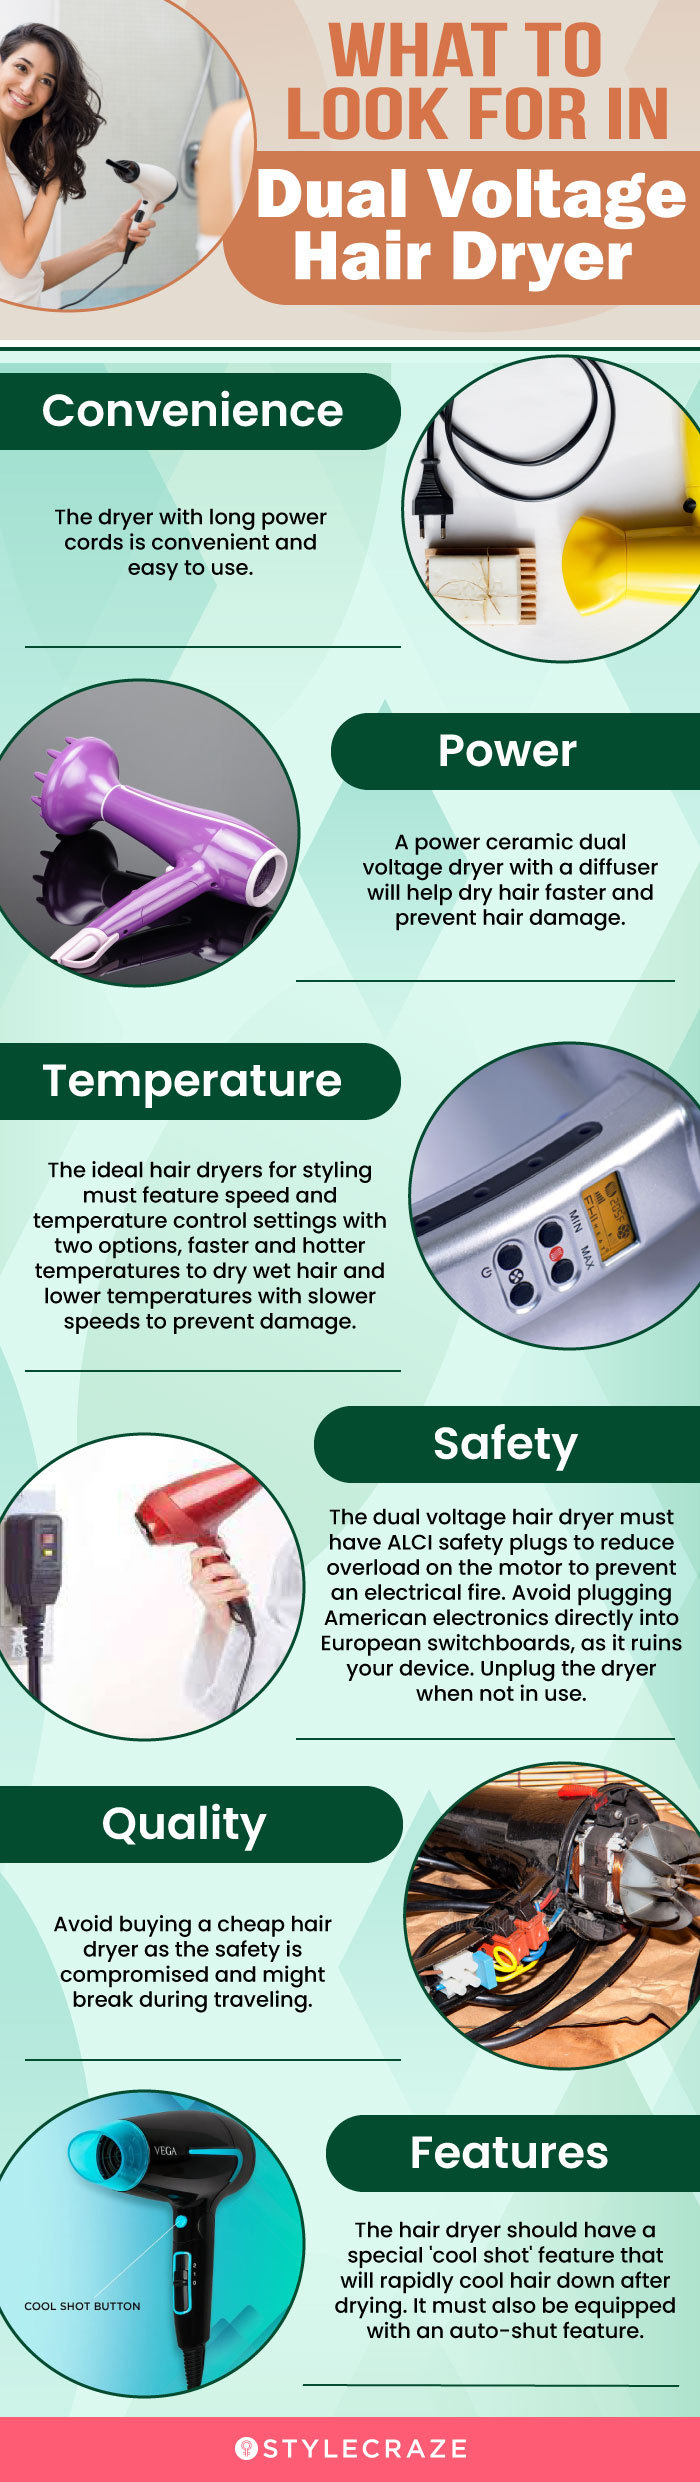 What To Look For In Dual Voltage Hair Dryer